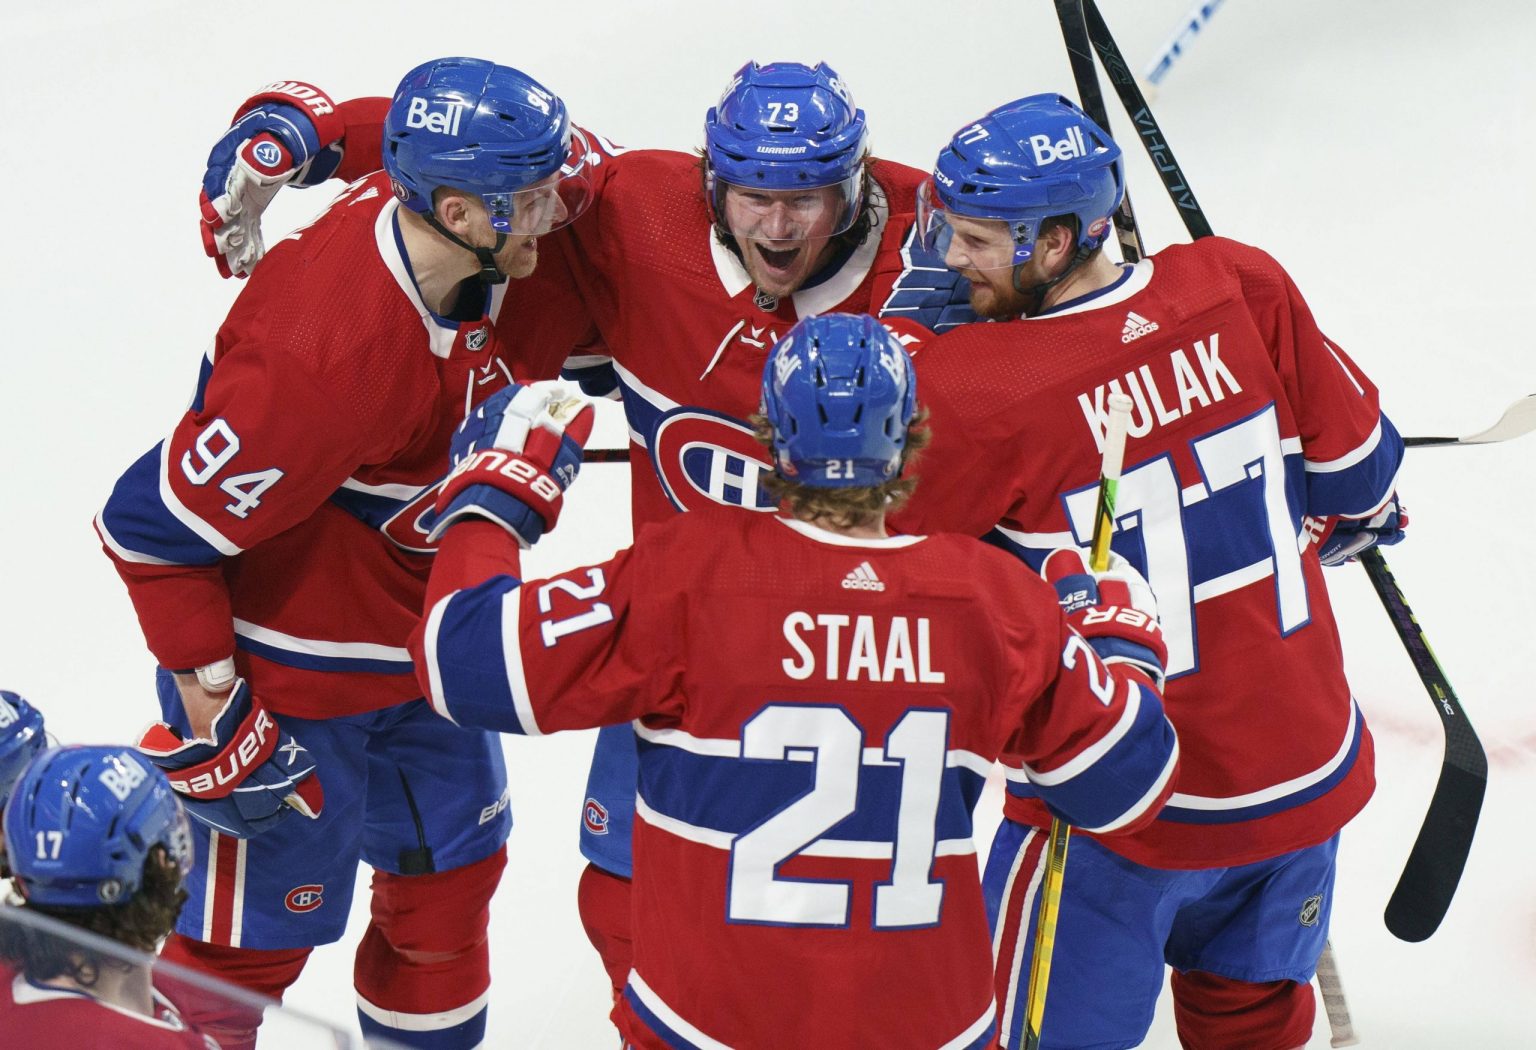 Montreal Canadians first in the National Hockey League semifinals